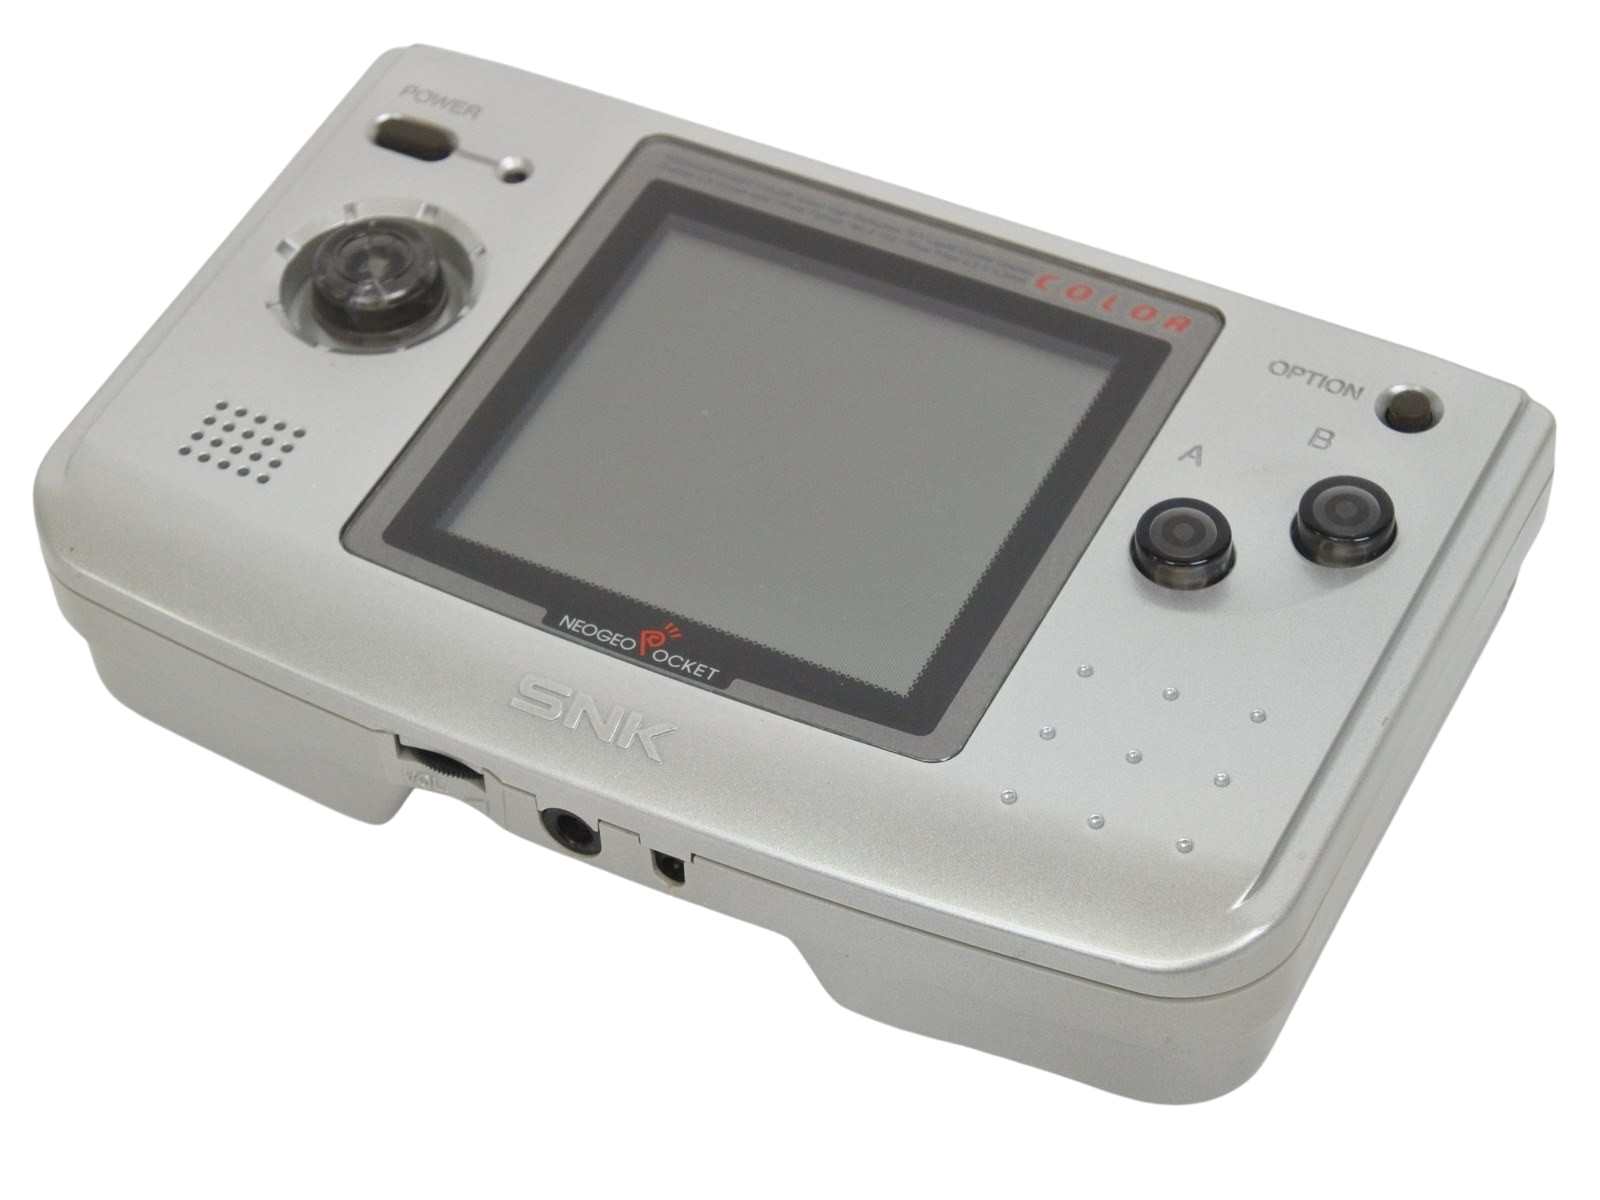 The SNK Neo Geo Pocket Color handheld videogame console